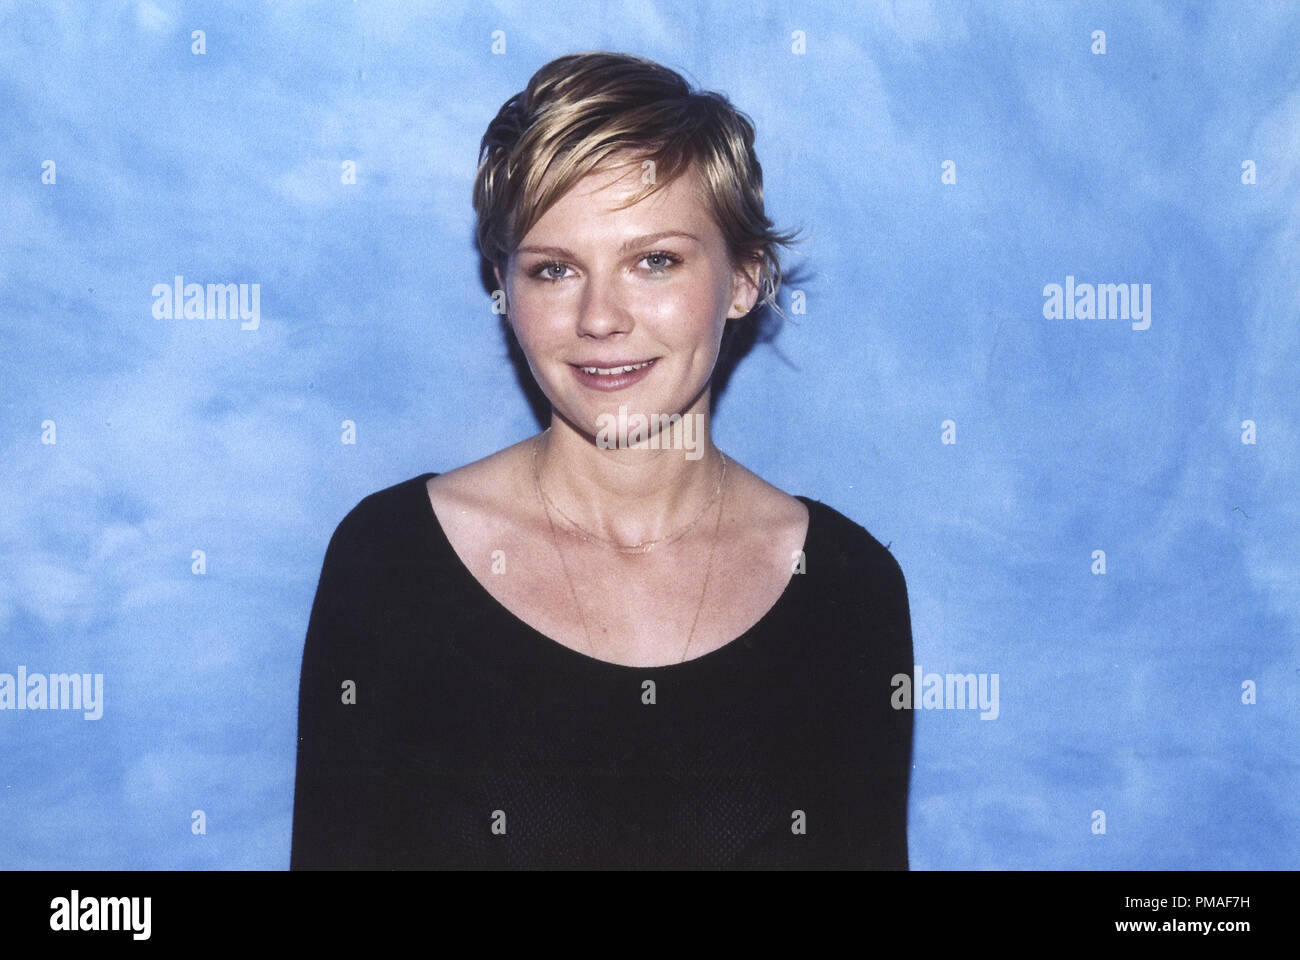 Portrait of Kirsten Dunst, circa 2004 © JRC /The Hollywood Archive - All Rights Reserved  File Reference # 32633 330JRC Stock Photo